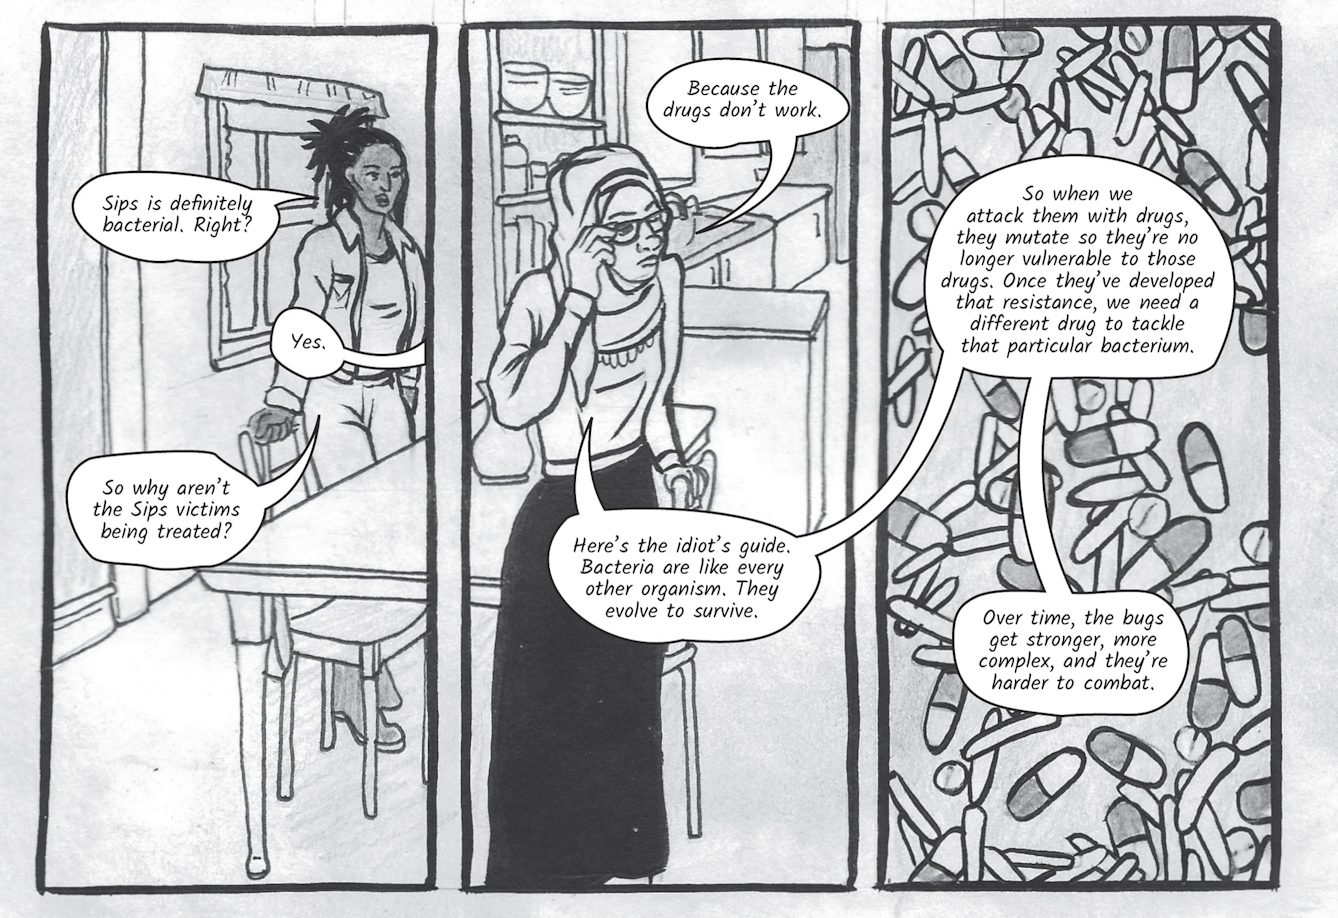 The greyscale graphic novel continues. The ninth image contains three illustrated boxes. The box on the right contains drawings of micro bacteria and medicine pill capsules all mixed together. The left and centre boxes show a scene split across Dr Siddiqui's kitchen. In the left box Zoe, standing by a table, says,'Sips is definitely bacterial, right?', 'Yes' replies Dr Siddiqui. 'So why aren’t the Sips victims being treated?' asks Zoe. Dr Siddiqui, touching her glasses says, 'Because the drugs don’t work. Here’s the idiot’s guide. Bacteria are like every other organism. They evolve to survive. So when we attack them with drugs, they mutate so they’re no longer vulnerable to those drugs. Once they’ve developed that resistance, we need a different drug to tackle that particular bacterium. Over time, the bugs get stronger, and they’re harder to combat.'